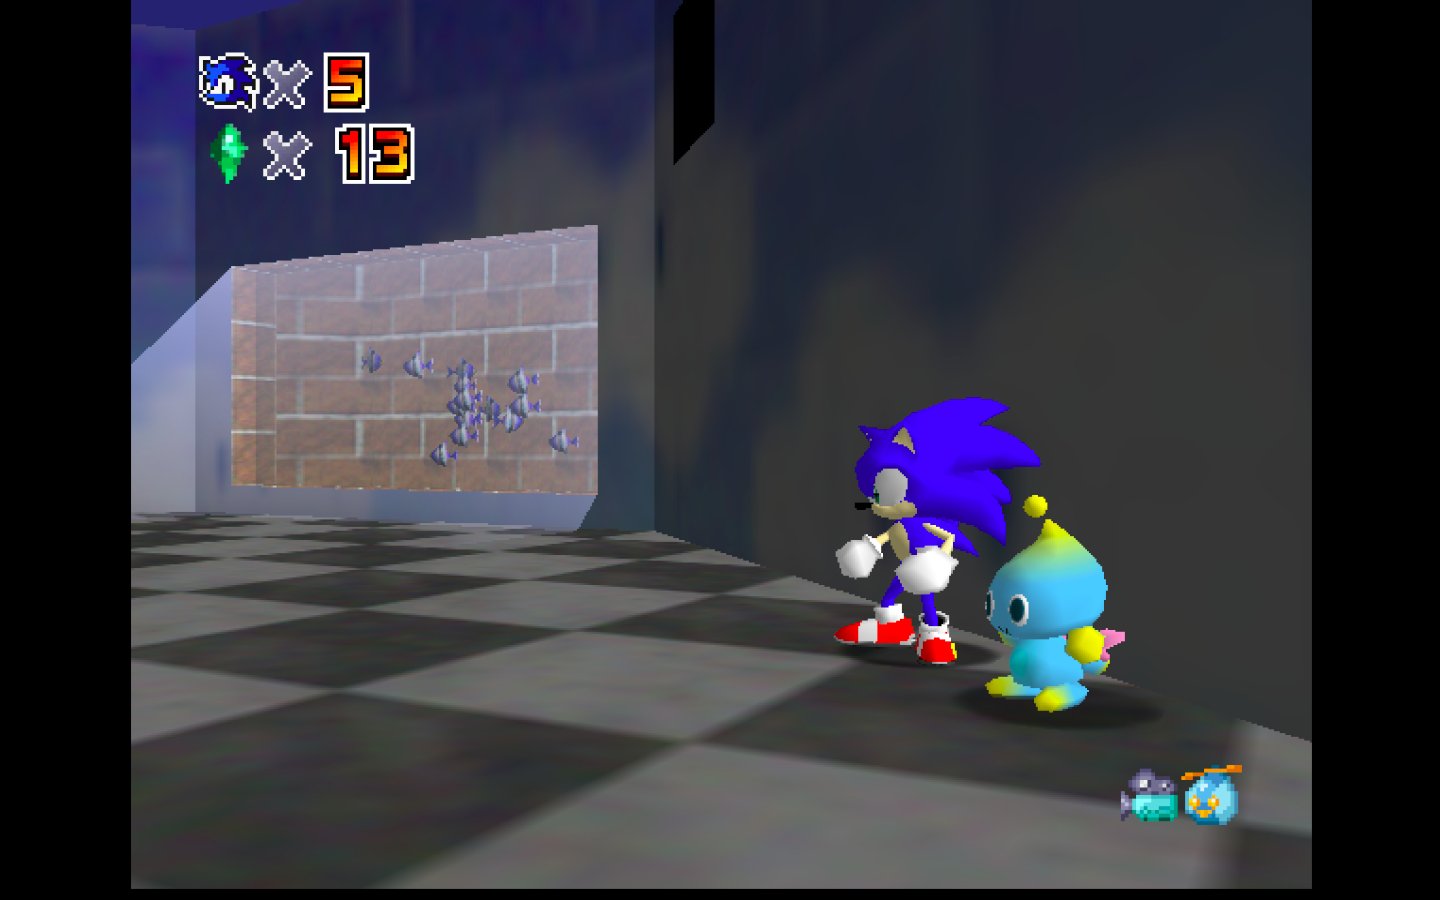 ✩ 𝒽𝒶𝒾𝓁𝑒𝓎 ✩ on X: Super Mario 64 really has evolved. We now have an  entire Sonic the Hedgehog SM64 mod, with its own original moveset, models,  and story. This is honestly